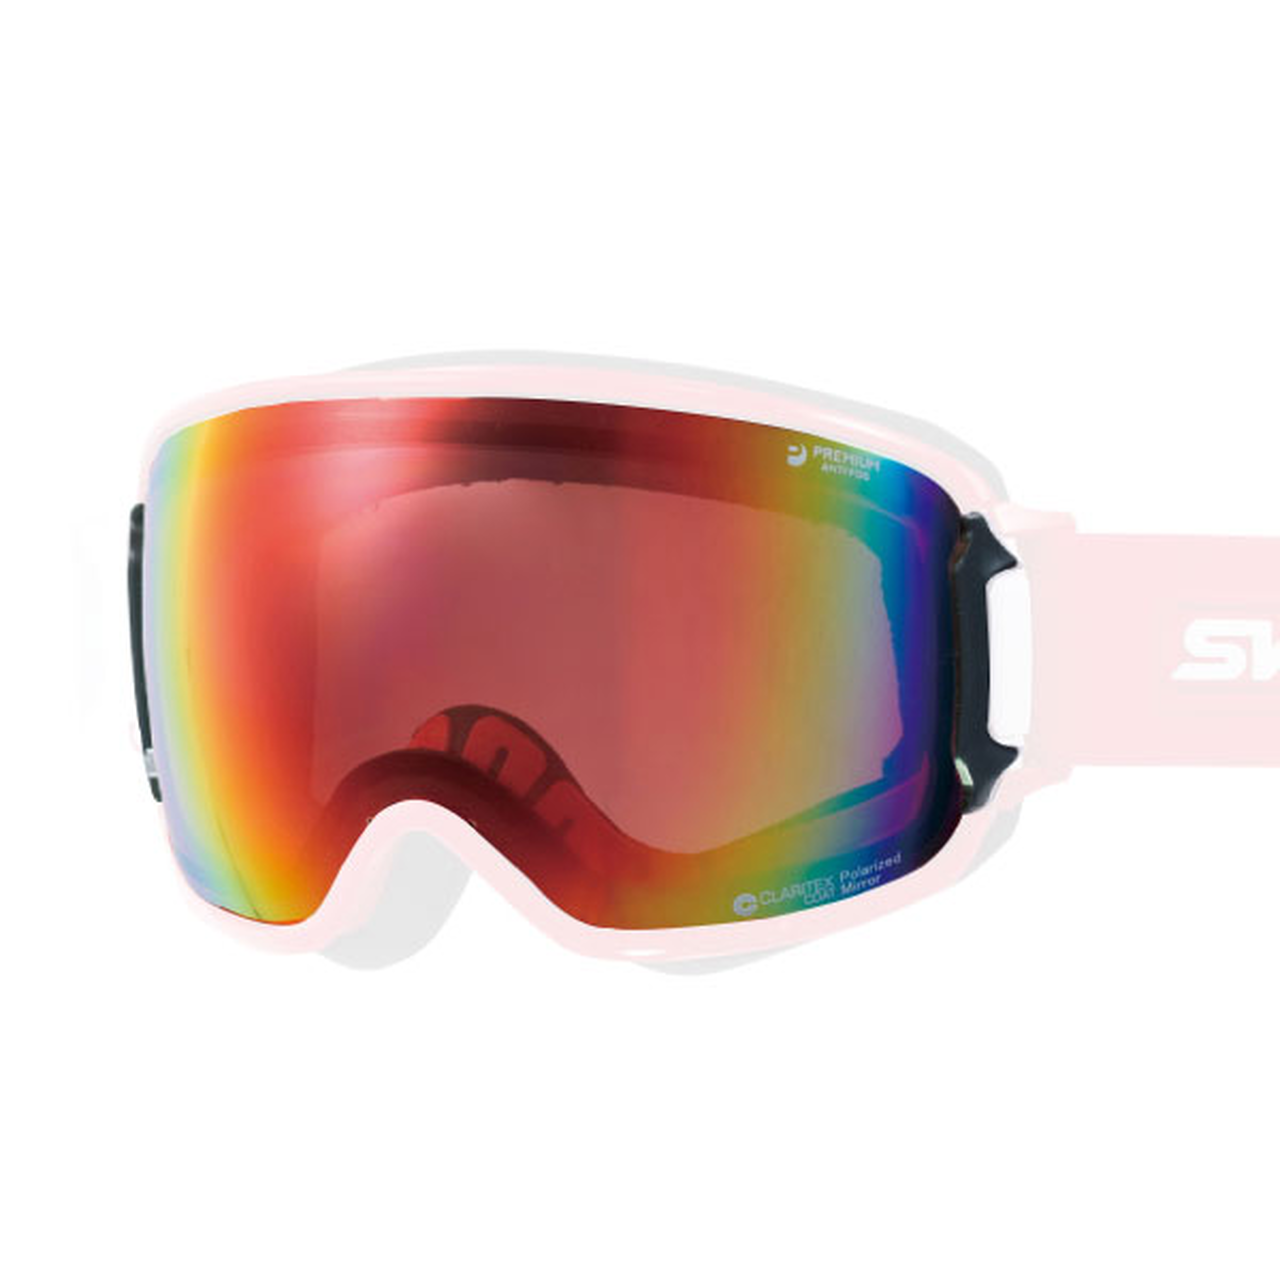 LRV-1357 Shadow mirror x Polarized pink for ROVO,Opt14, large image number 0